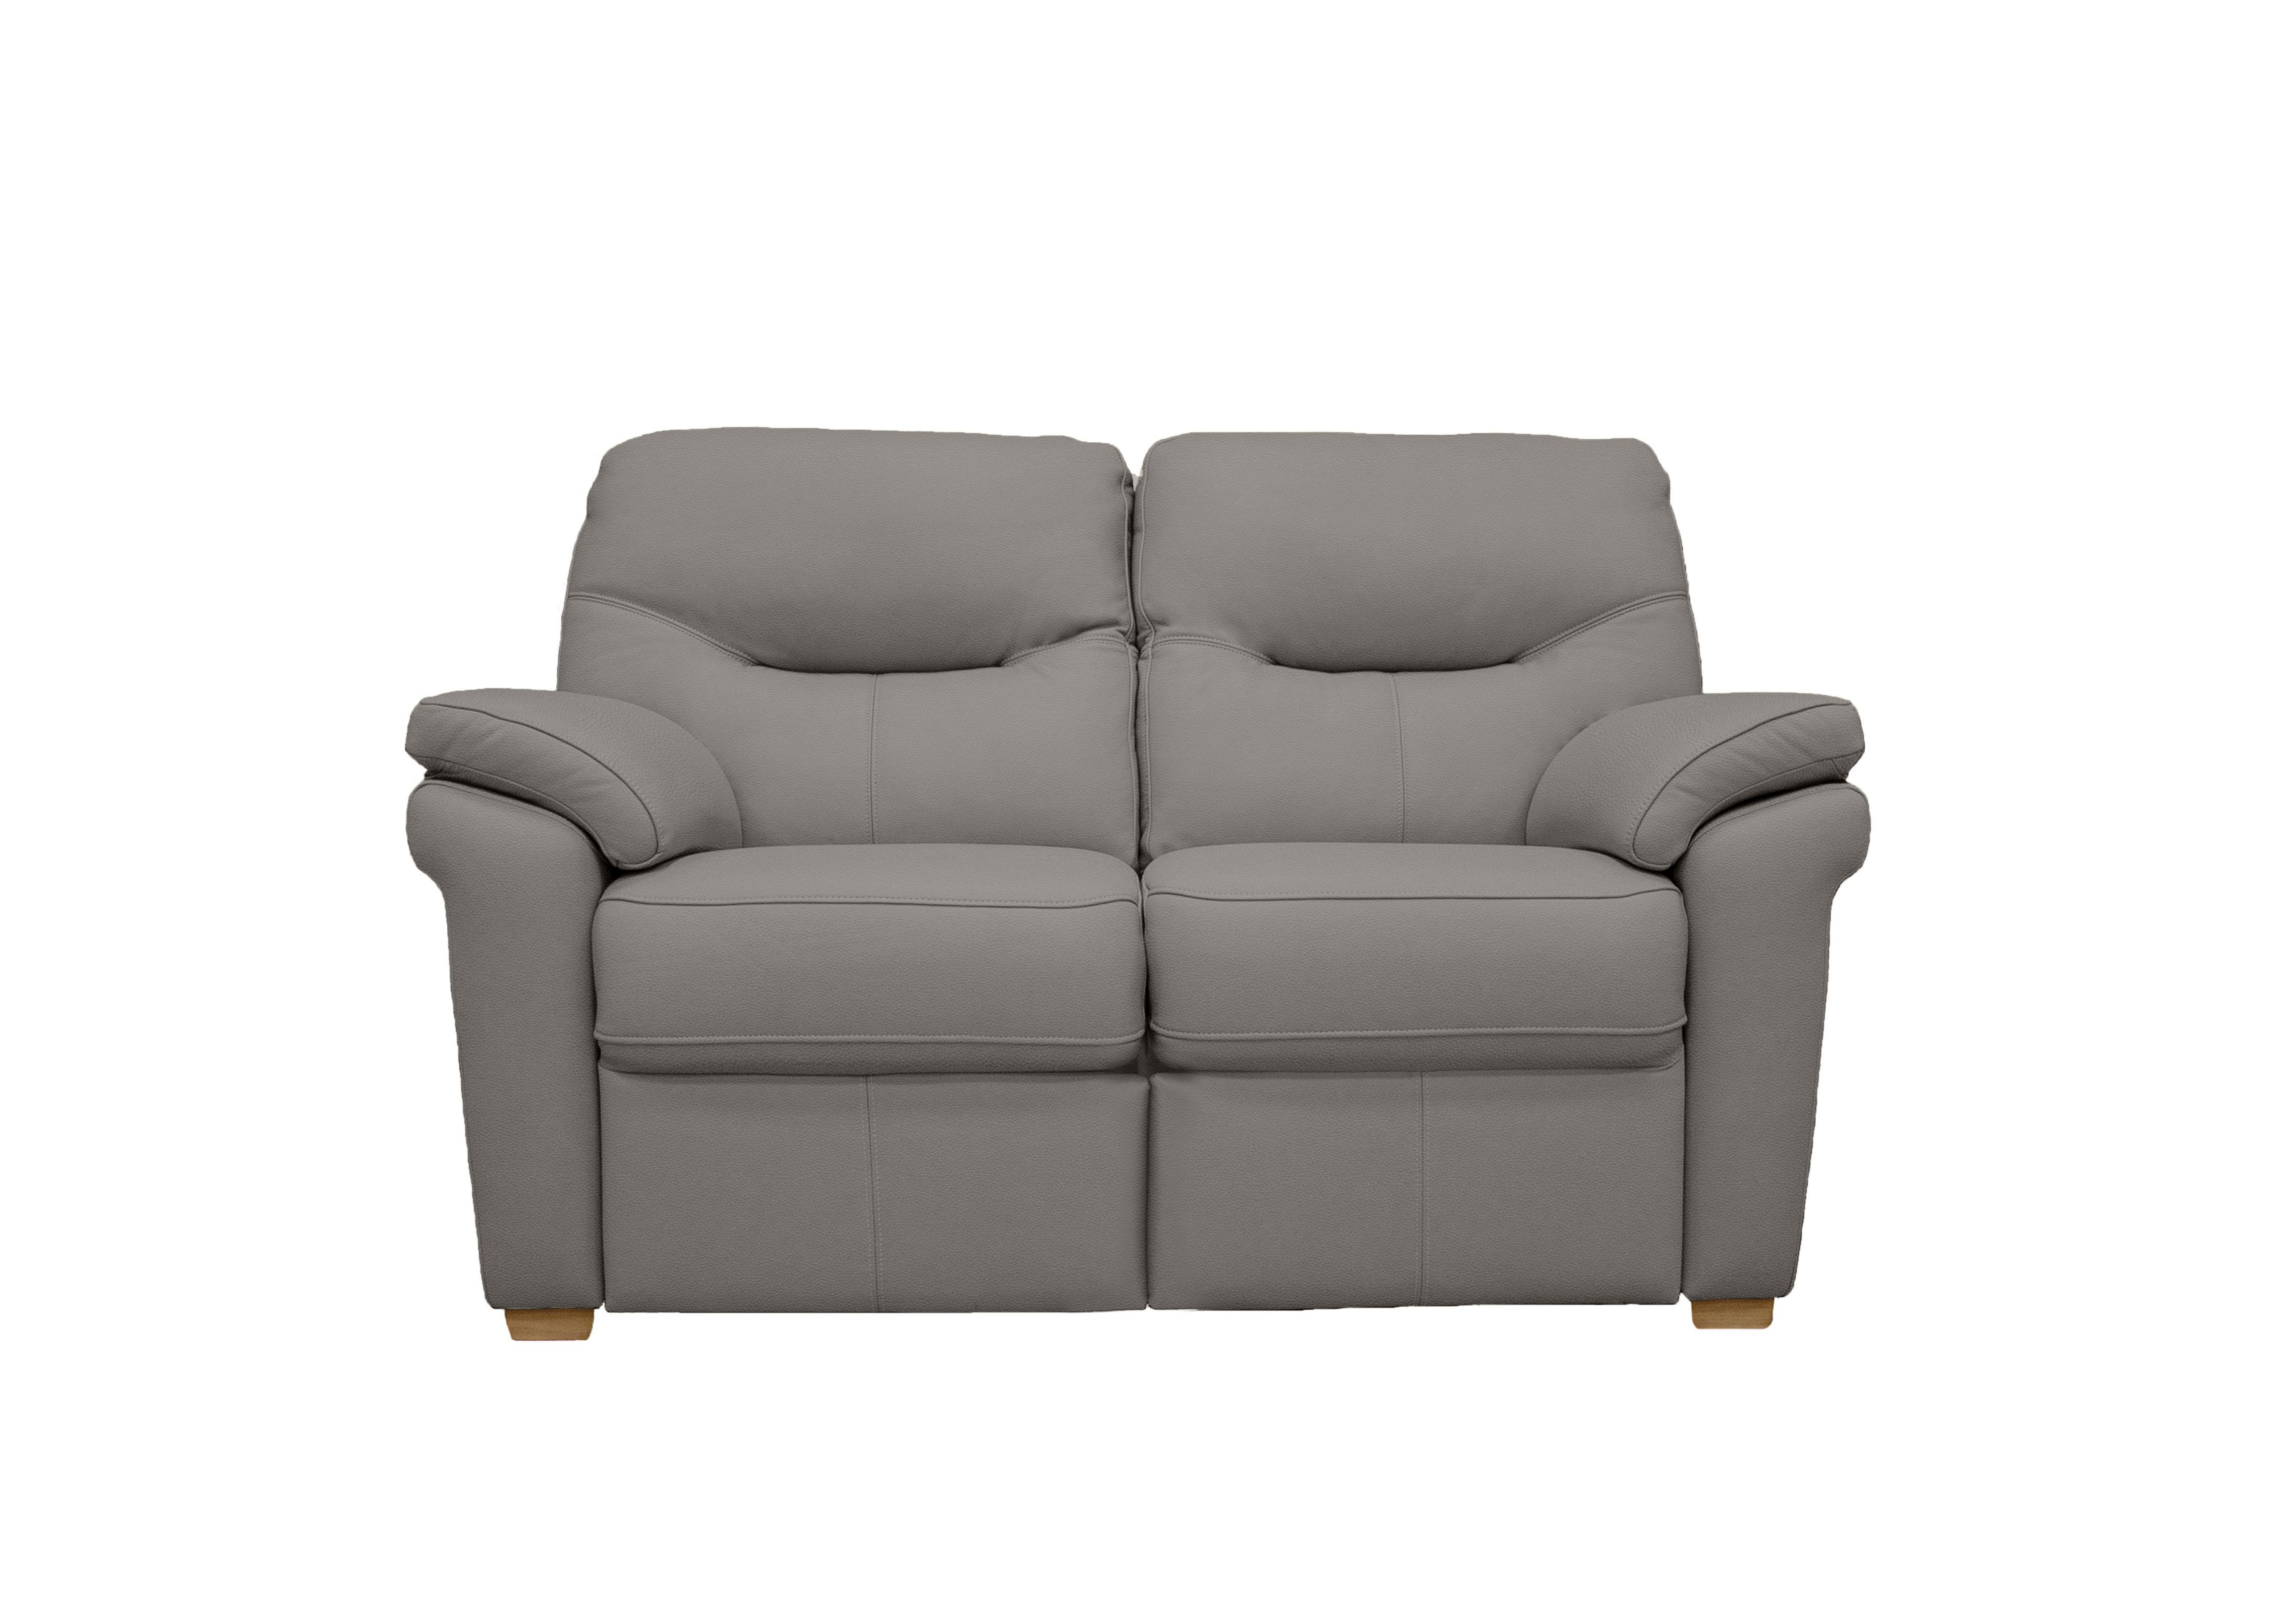 Seattle 2 Seater Leather Sofa with Wooden Feet in L842 Cambridge Grey Ok on Furniture Village